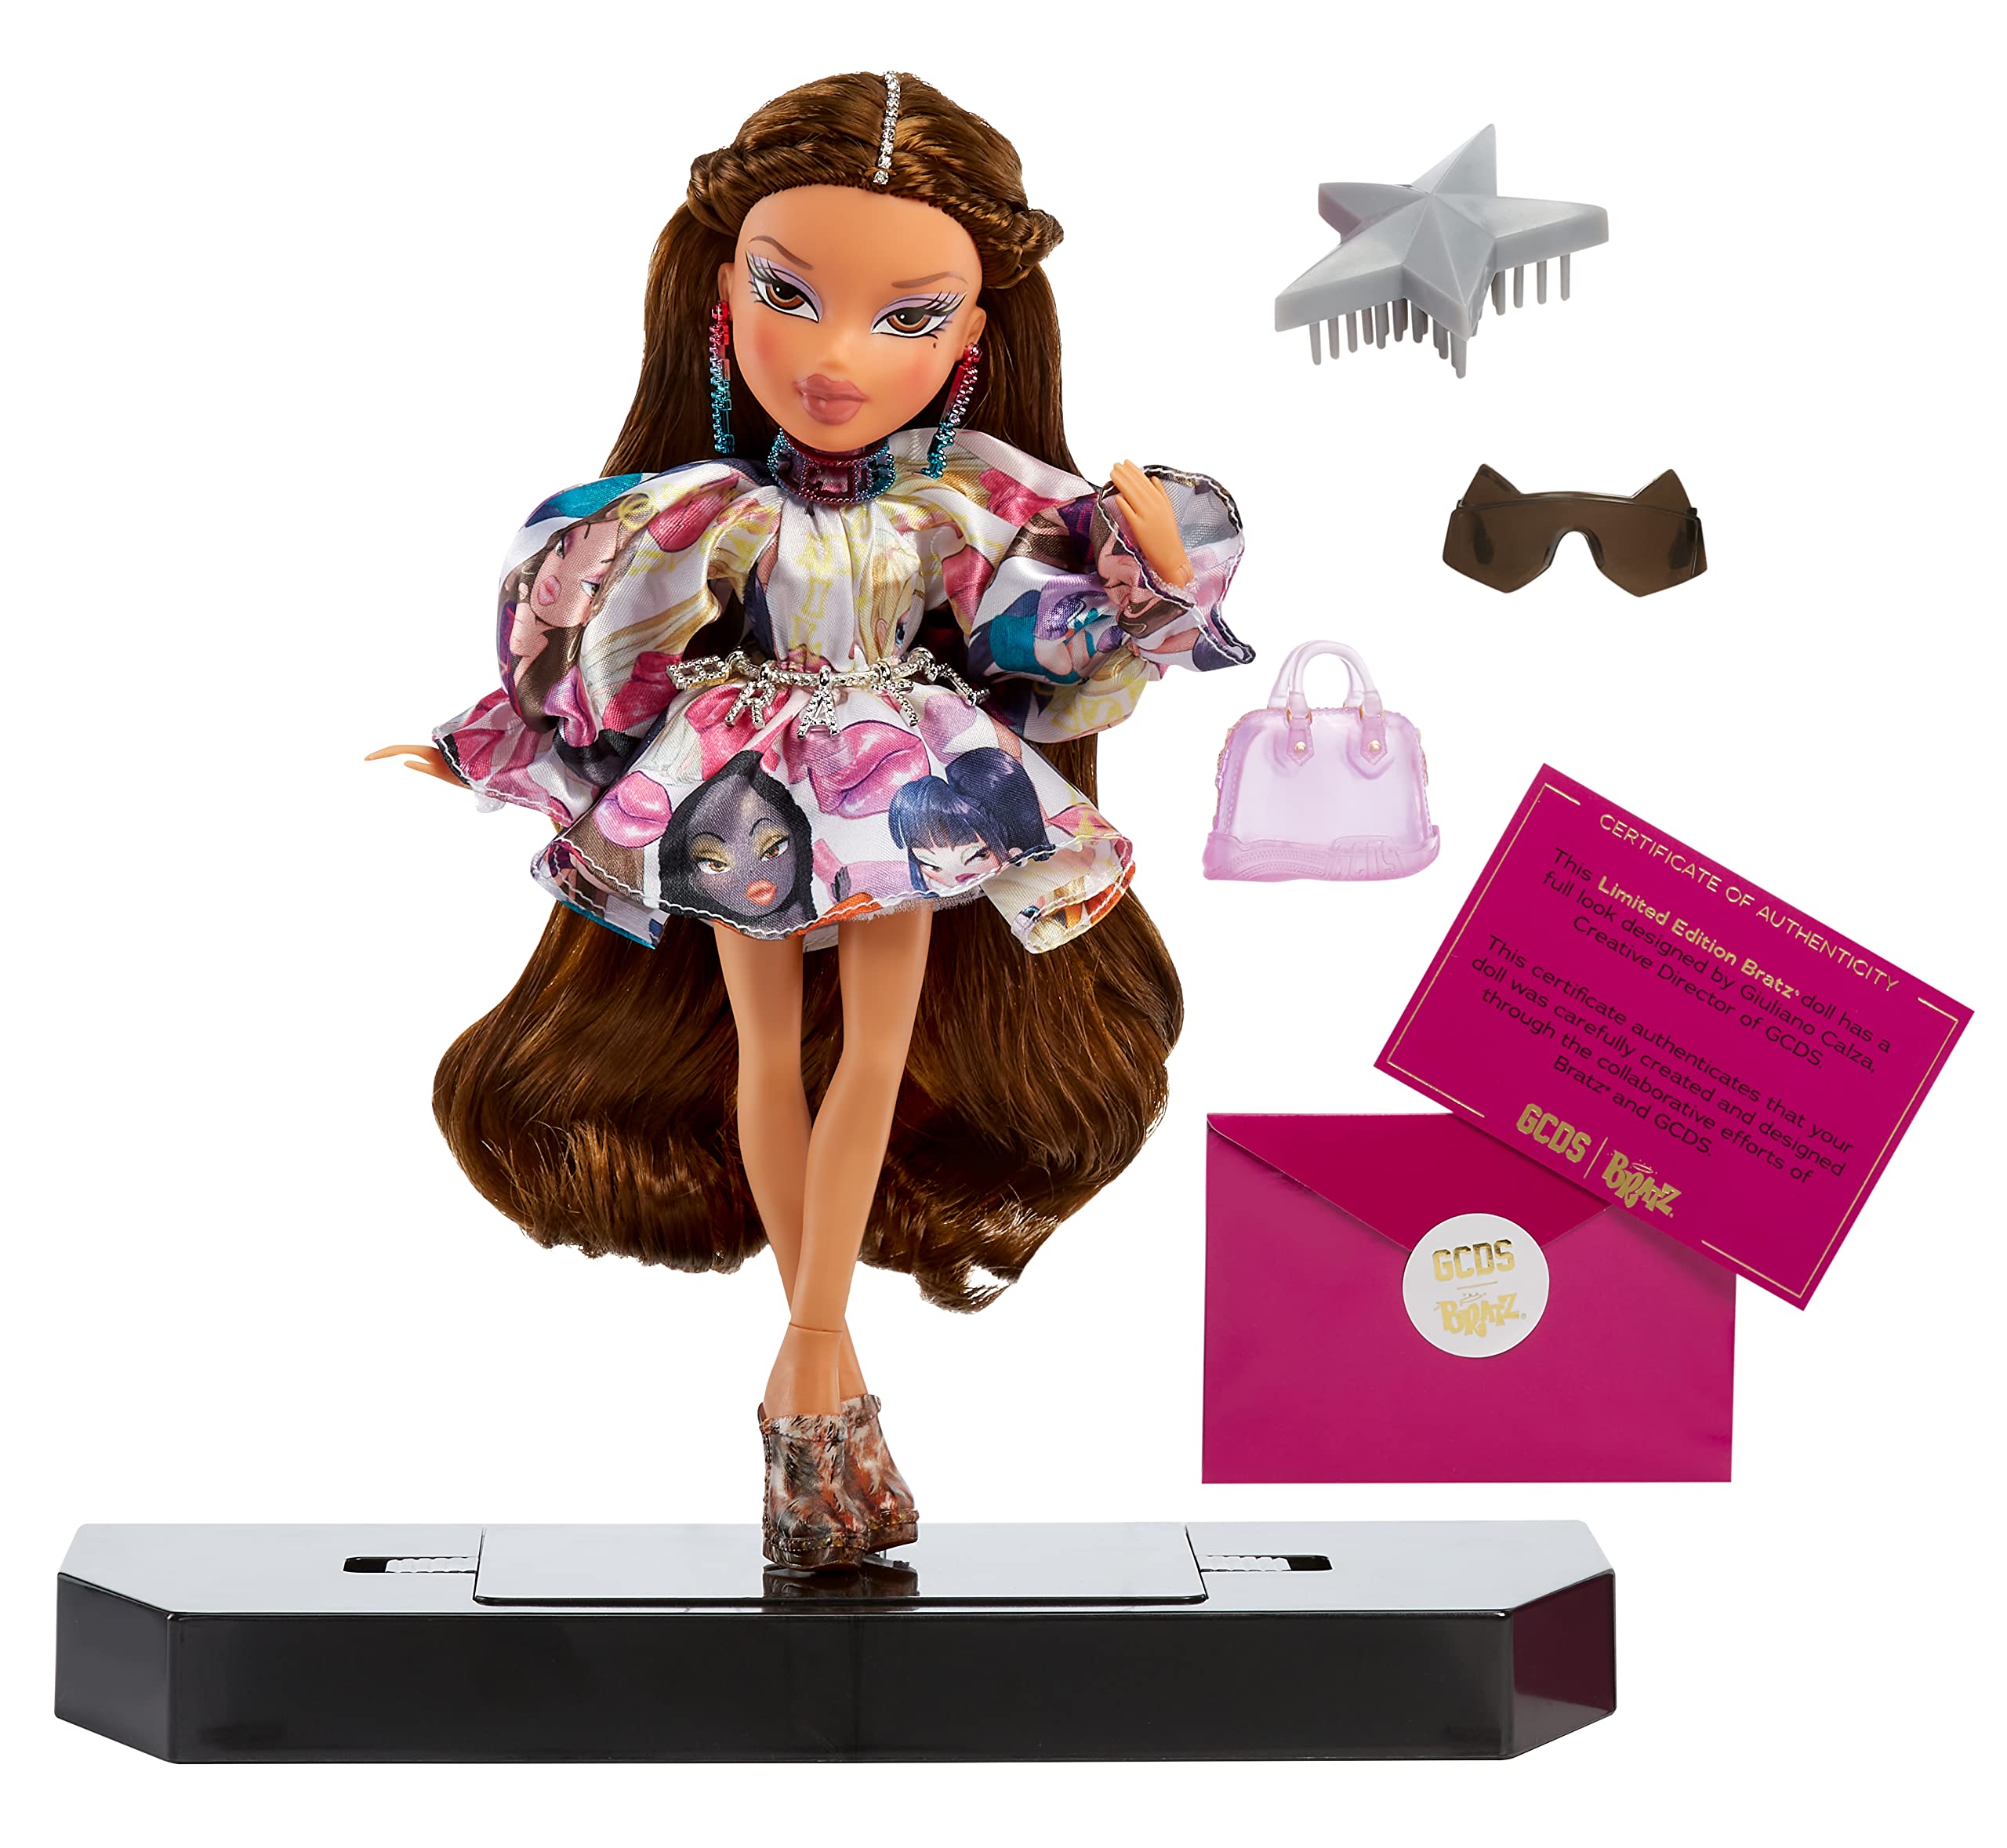 clothes and accessories made for Bratz dolls 